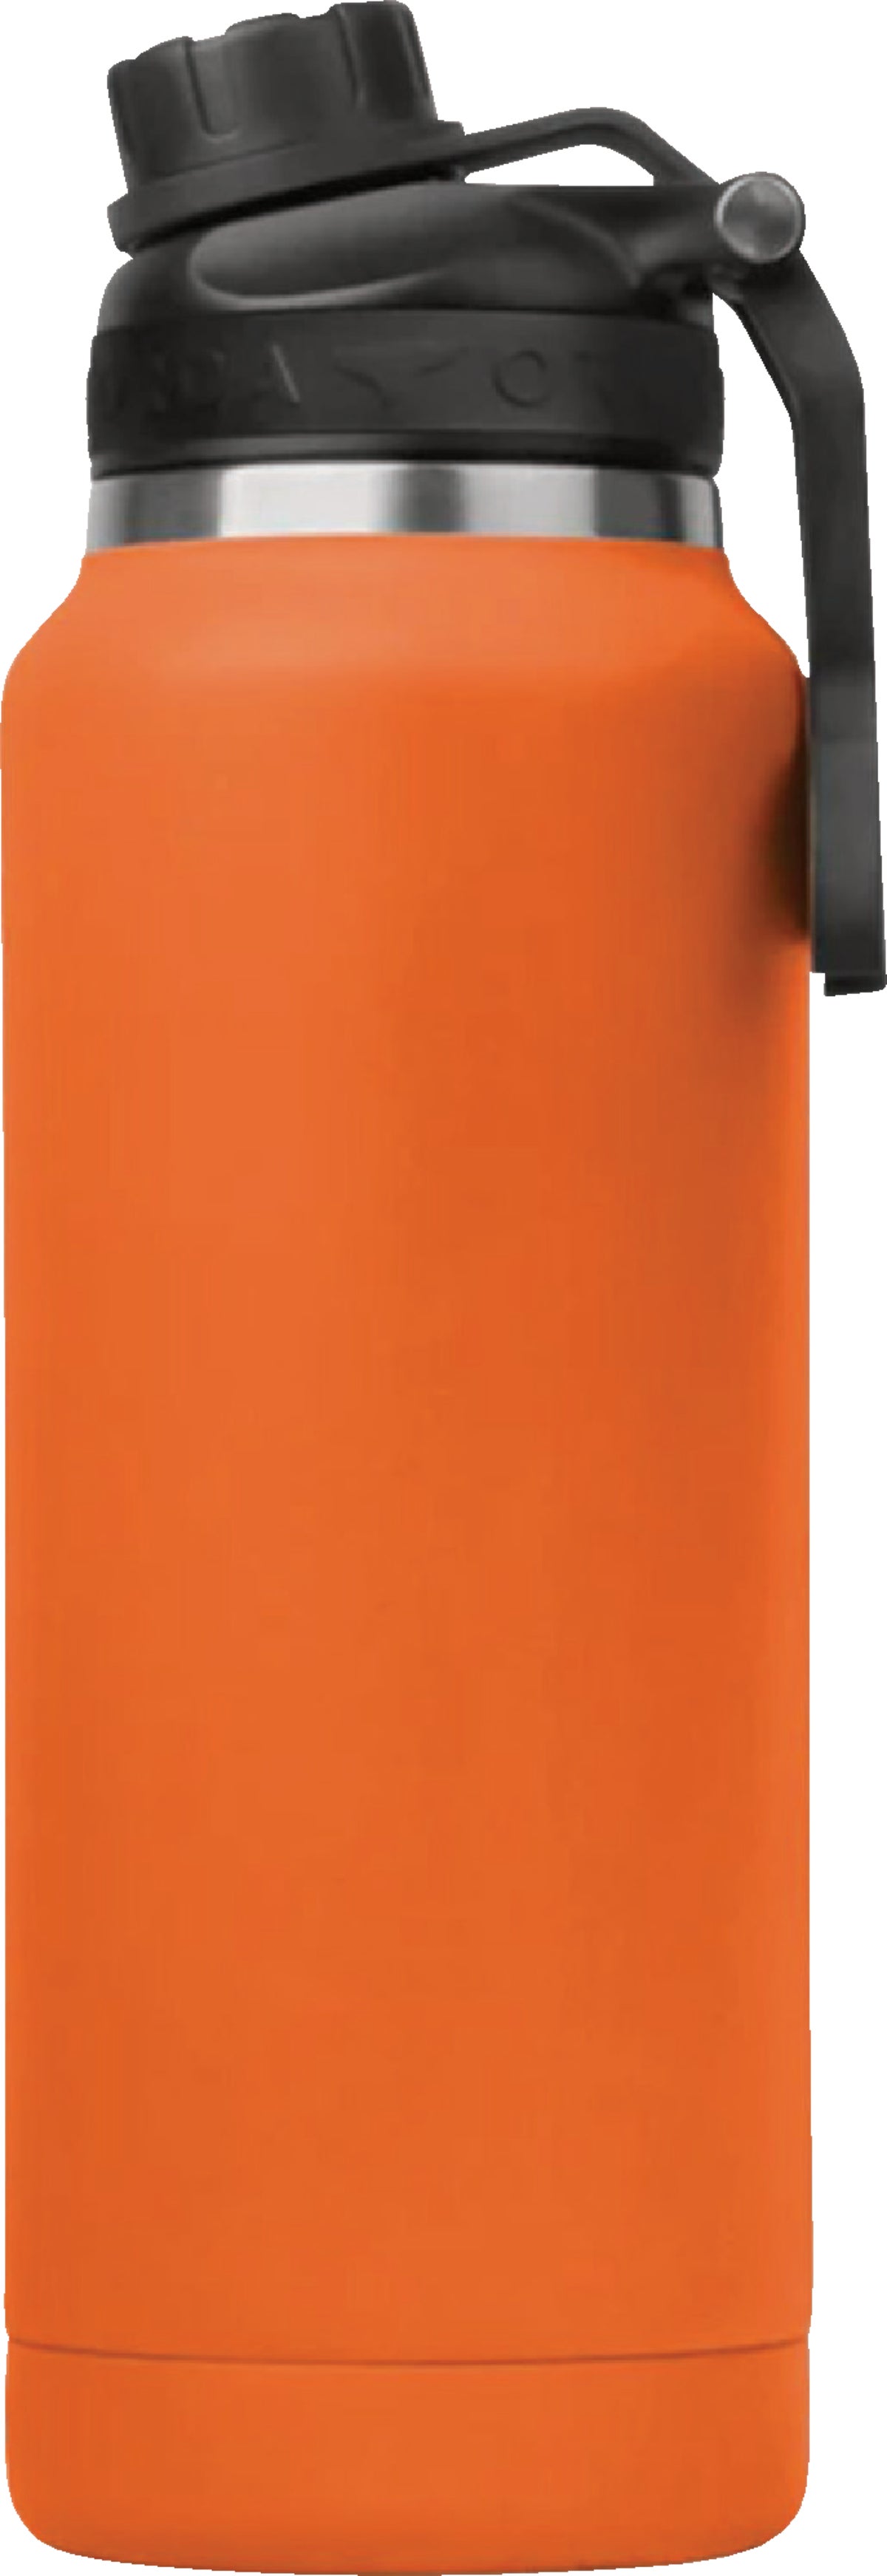 Orca Chaser 22 Oz. Blaze Orange Insulated Tumbler With Lid